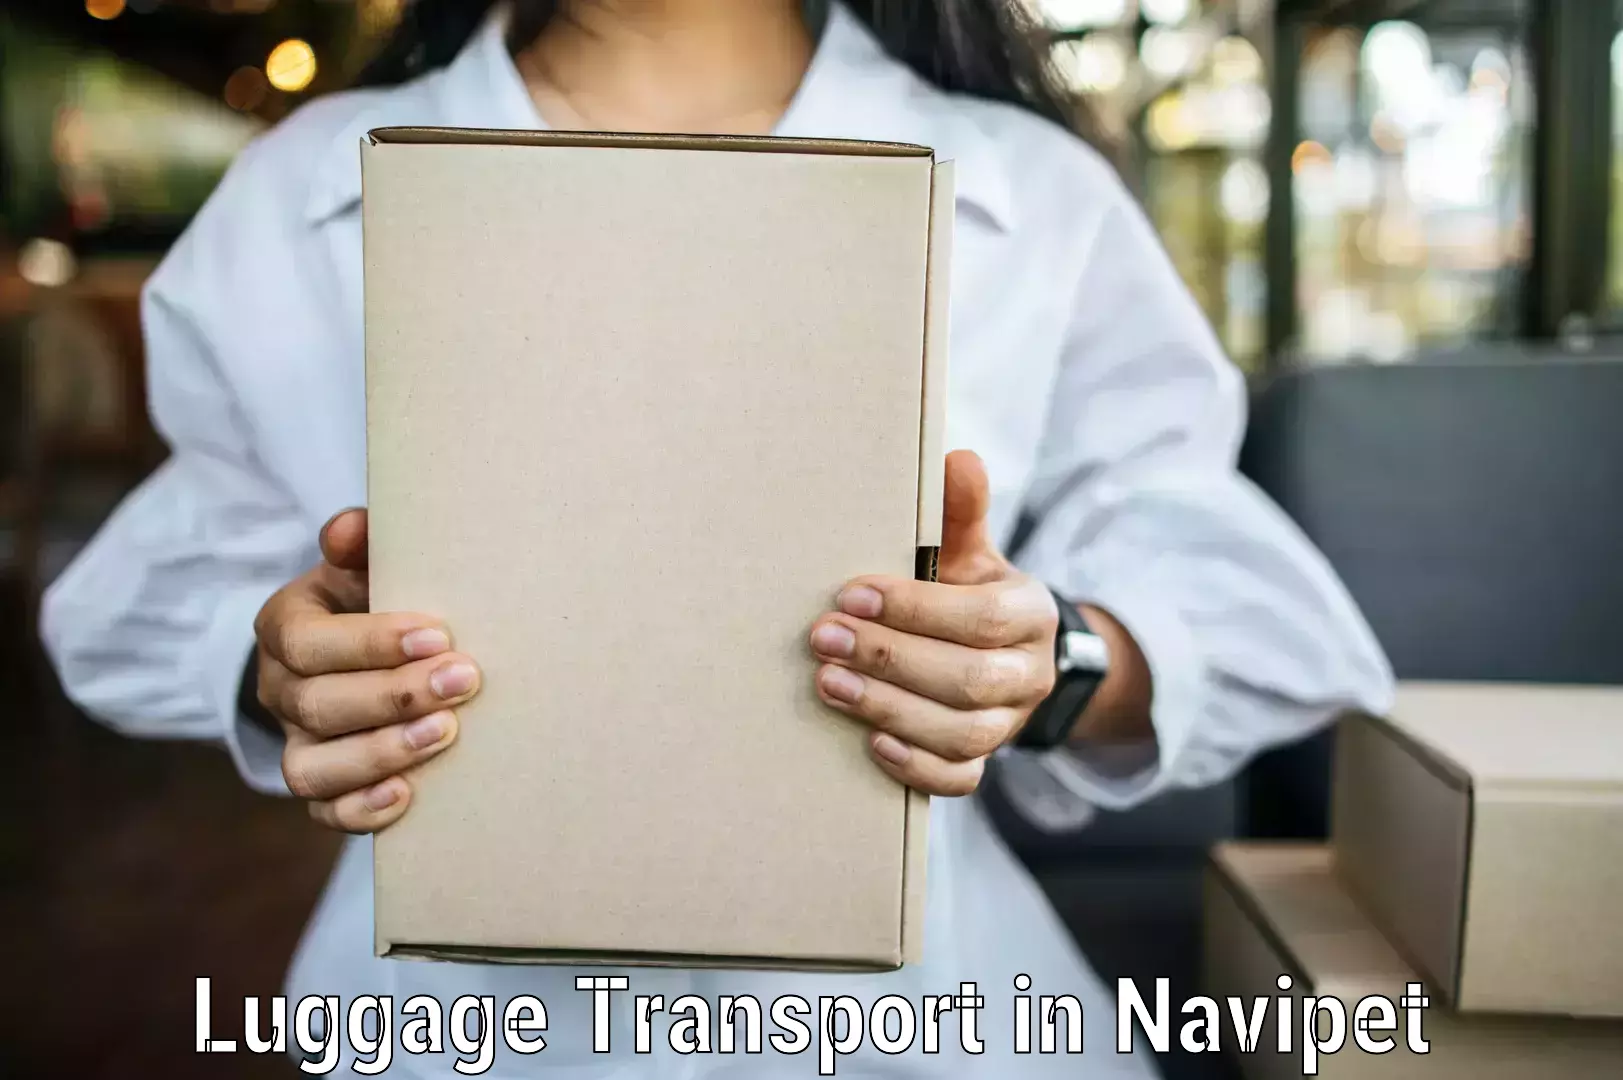 Luggage transport deals in Navipet